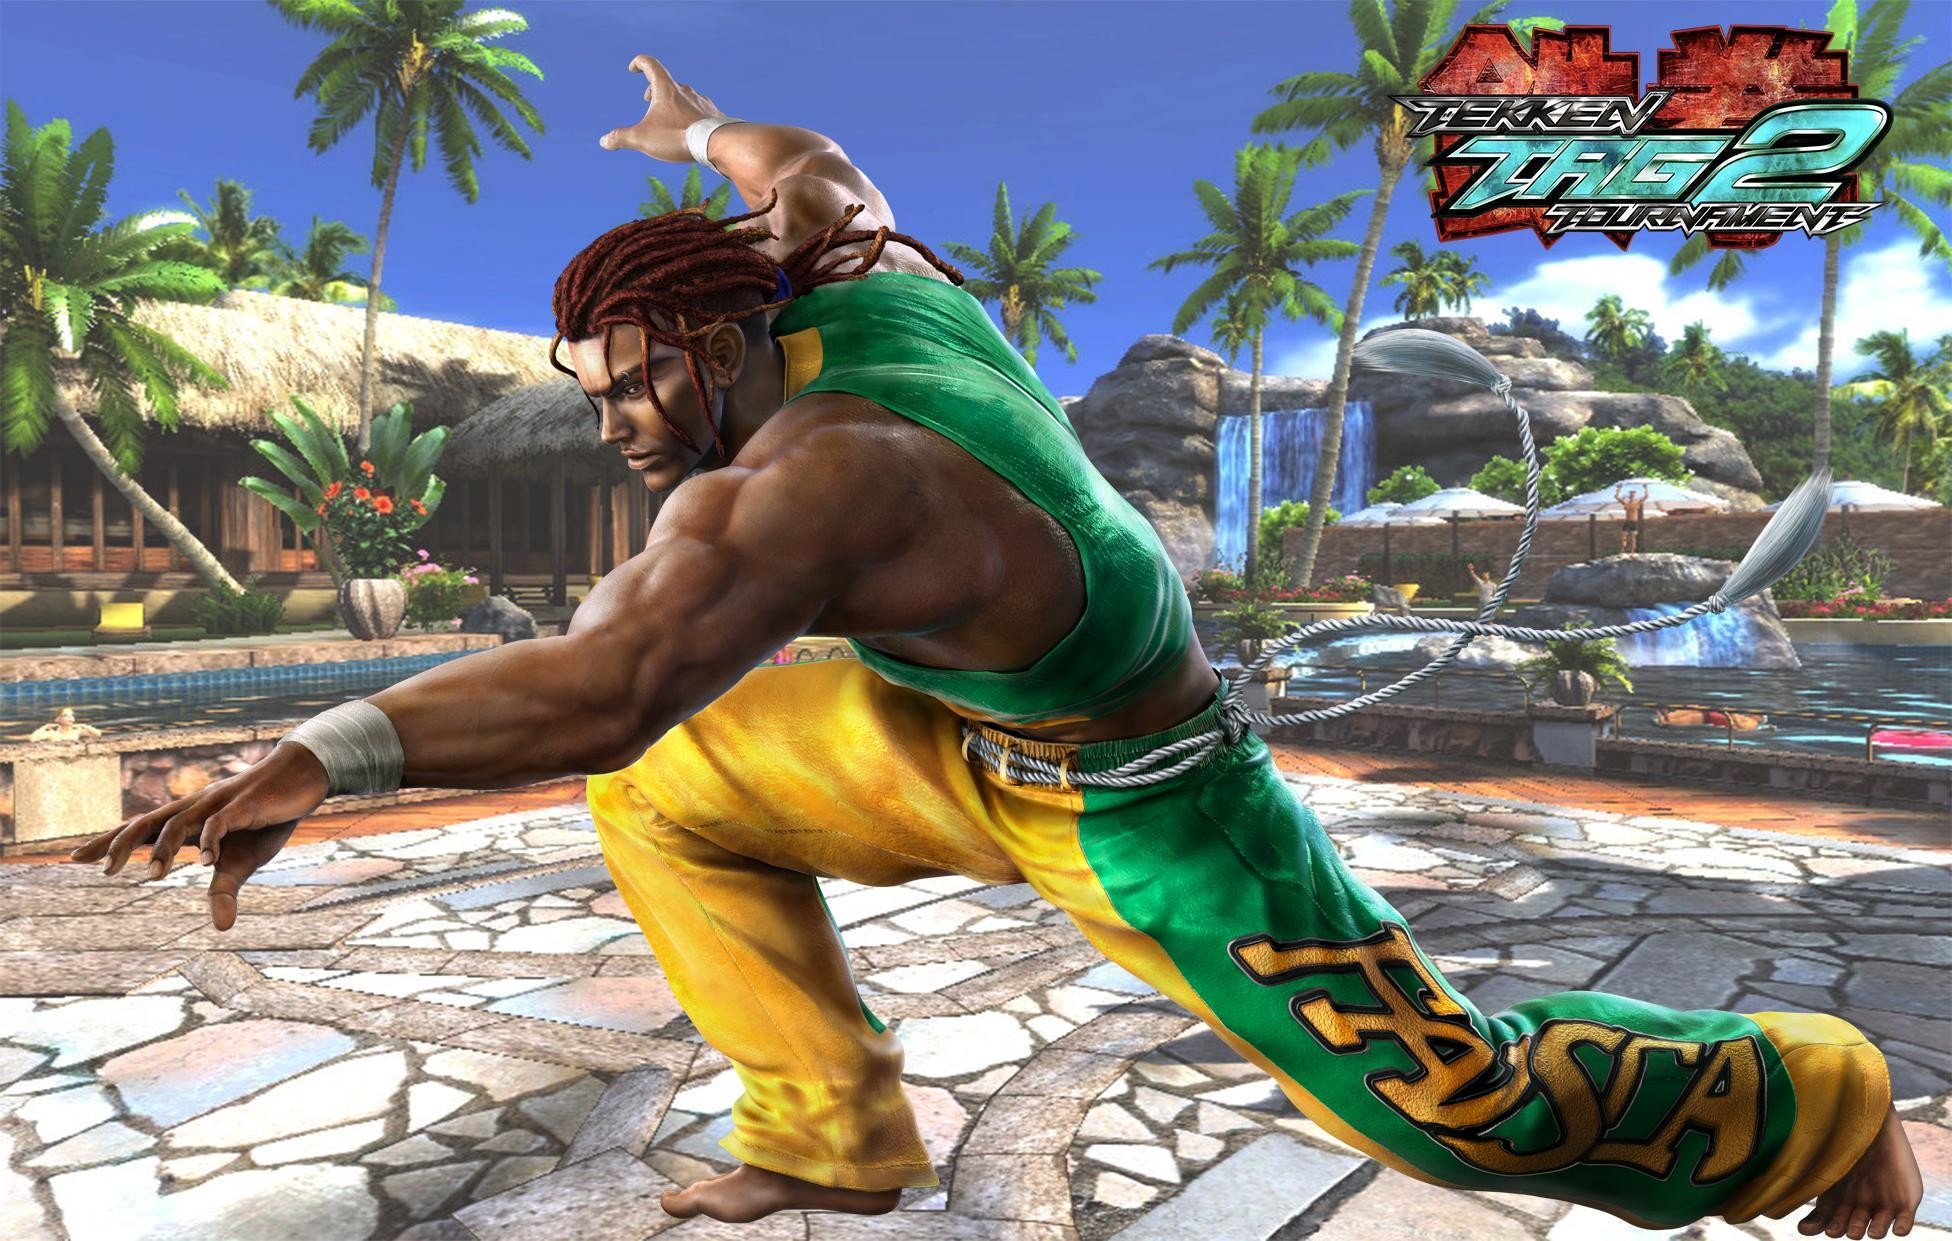 capoeira wallpaper,pc game,fictional character,animation,adventure game,action adventure game